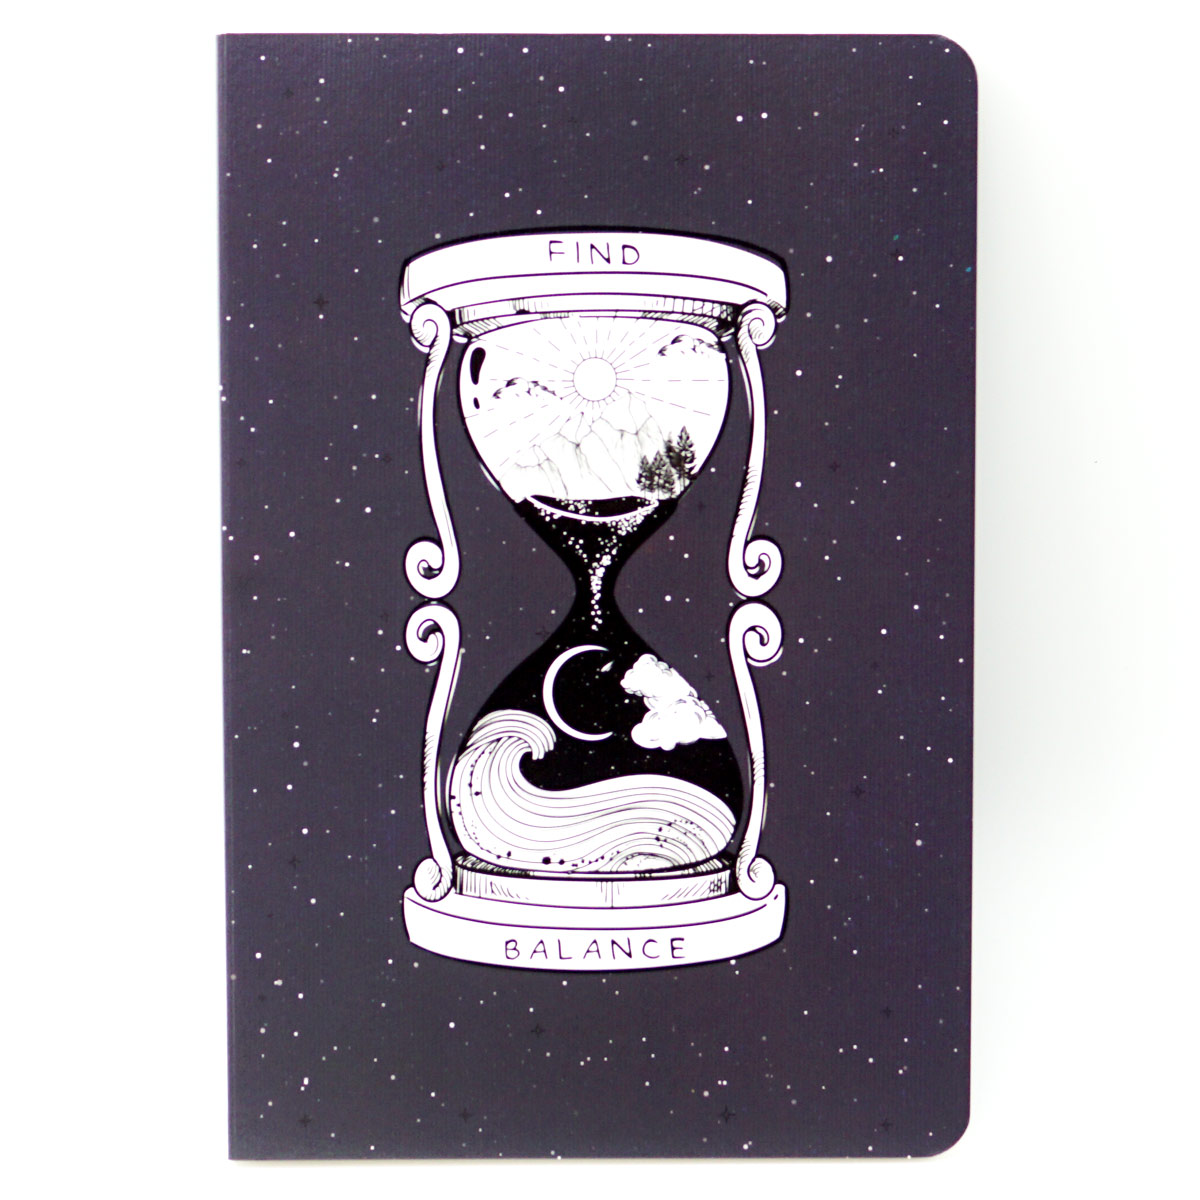 Factor A5 Black Color with Sand Clock Design Soft Bound Ruled Notebook 90 GSM With 160 Pages SKU 50228